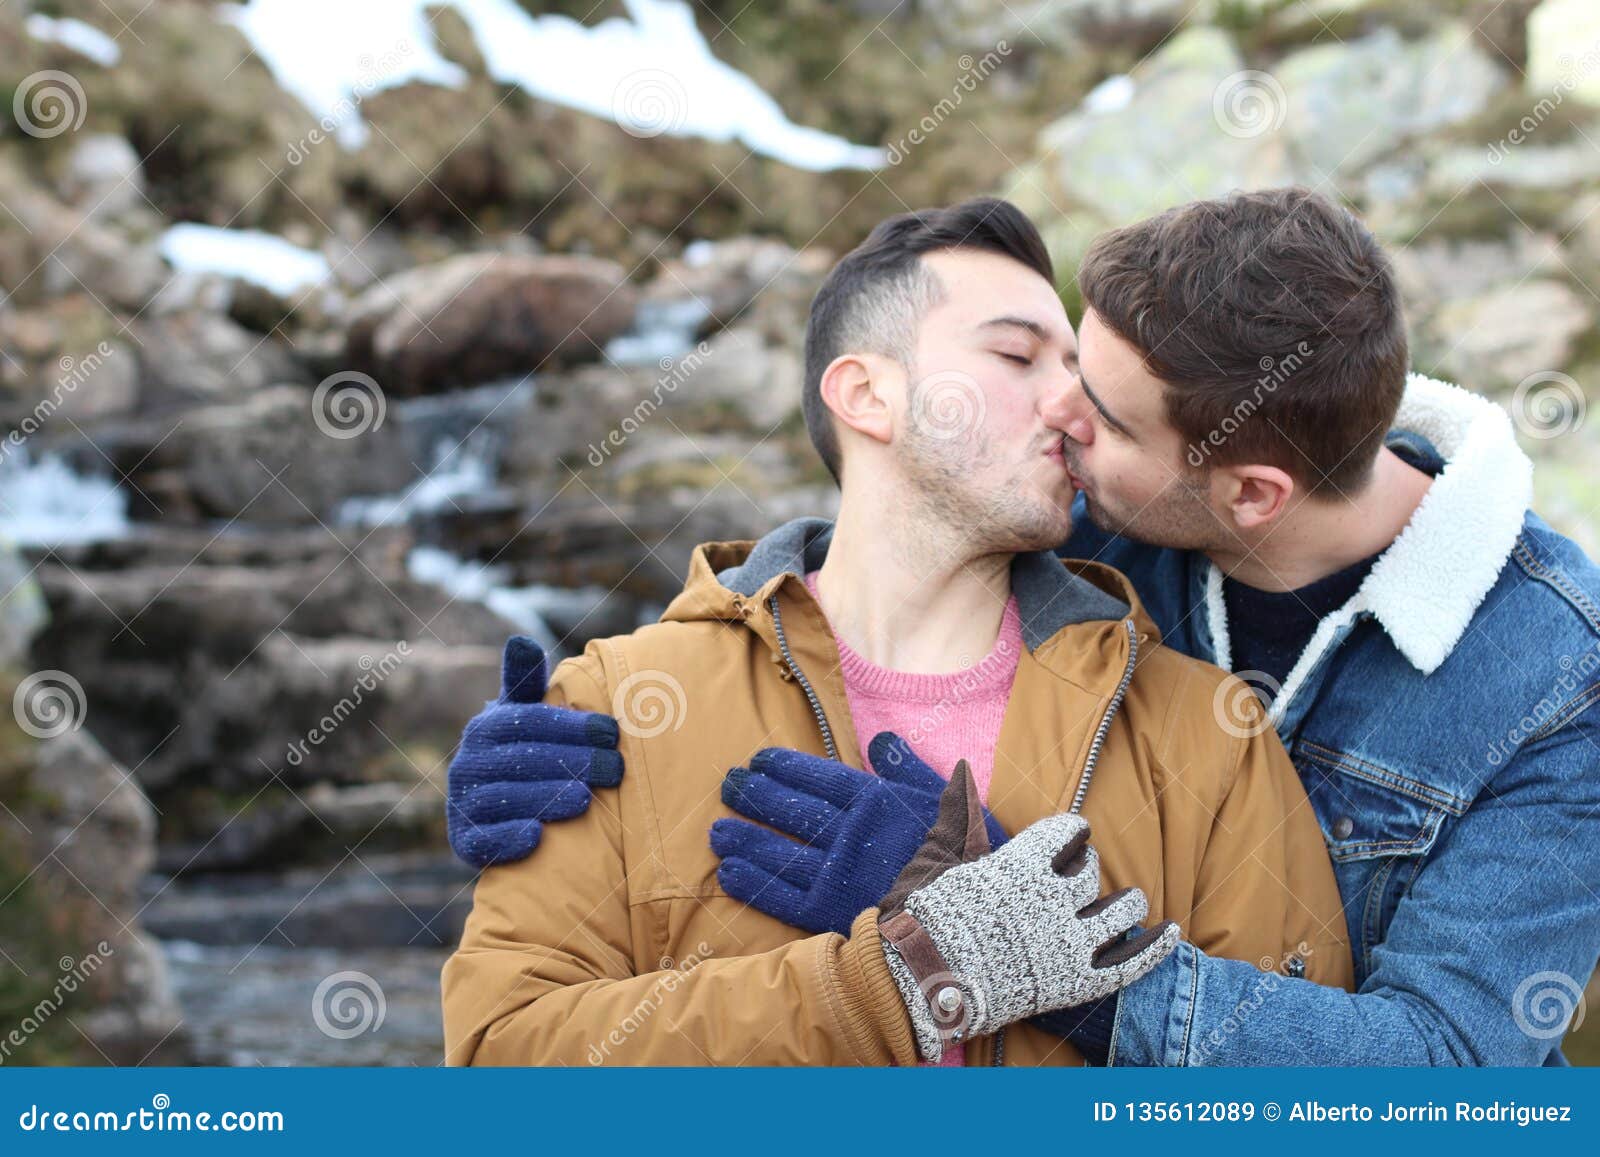 Couple Kissing in Nature Stock Image - Image of family, american: